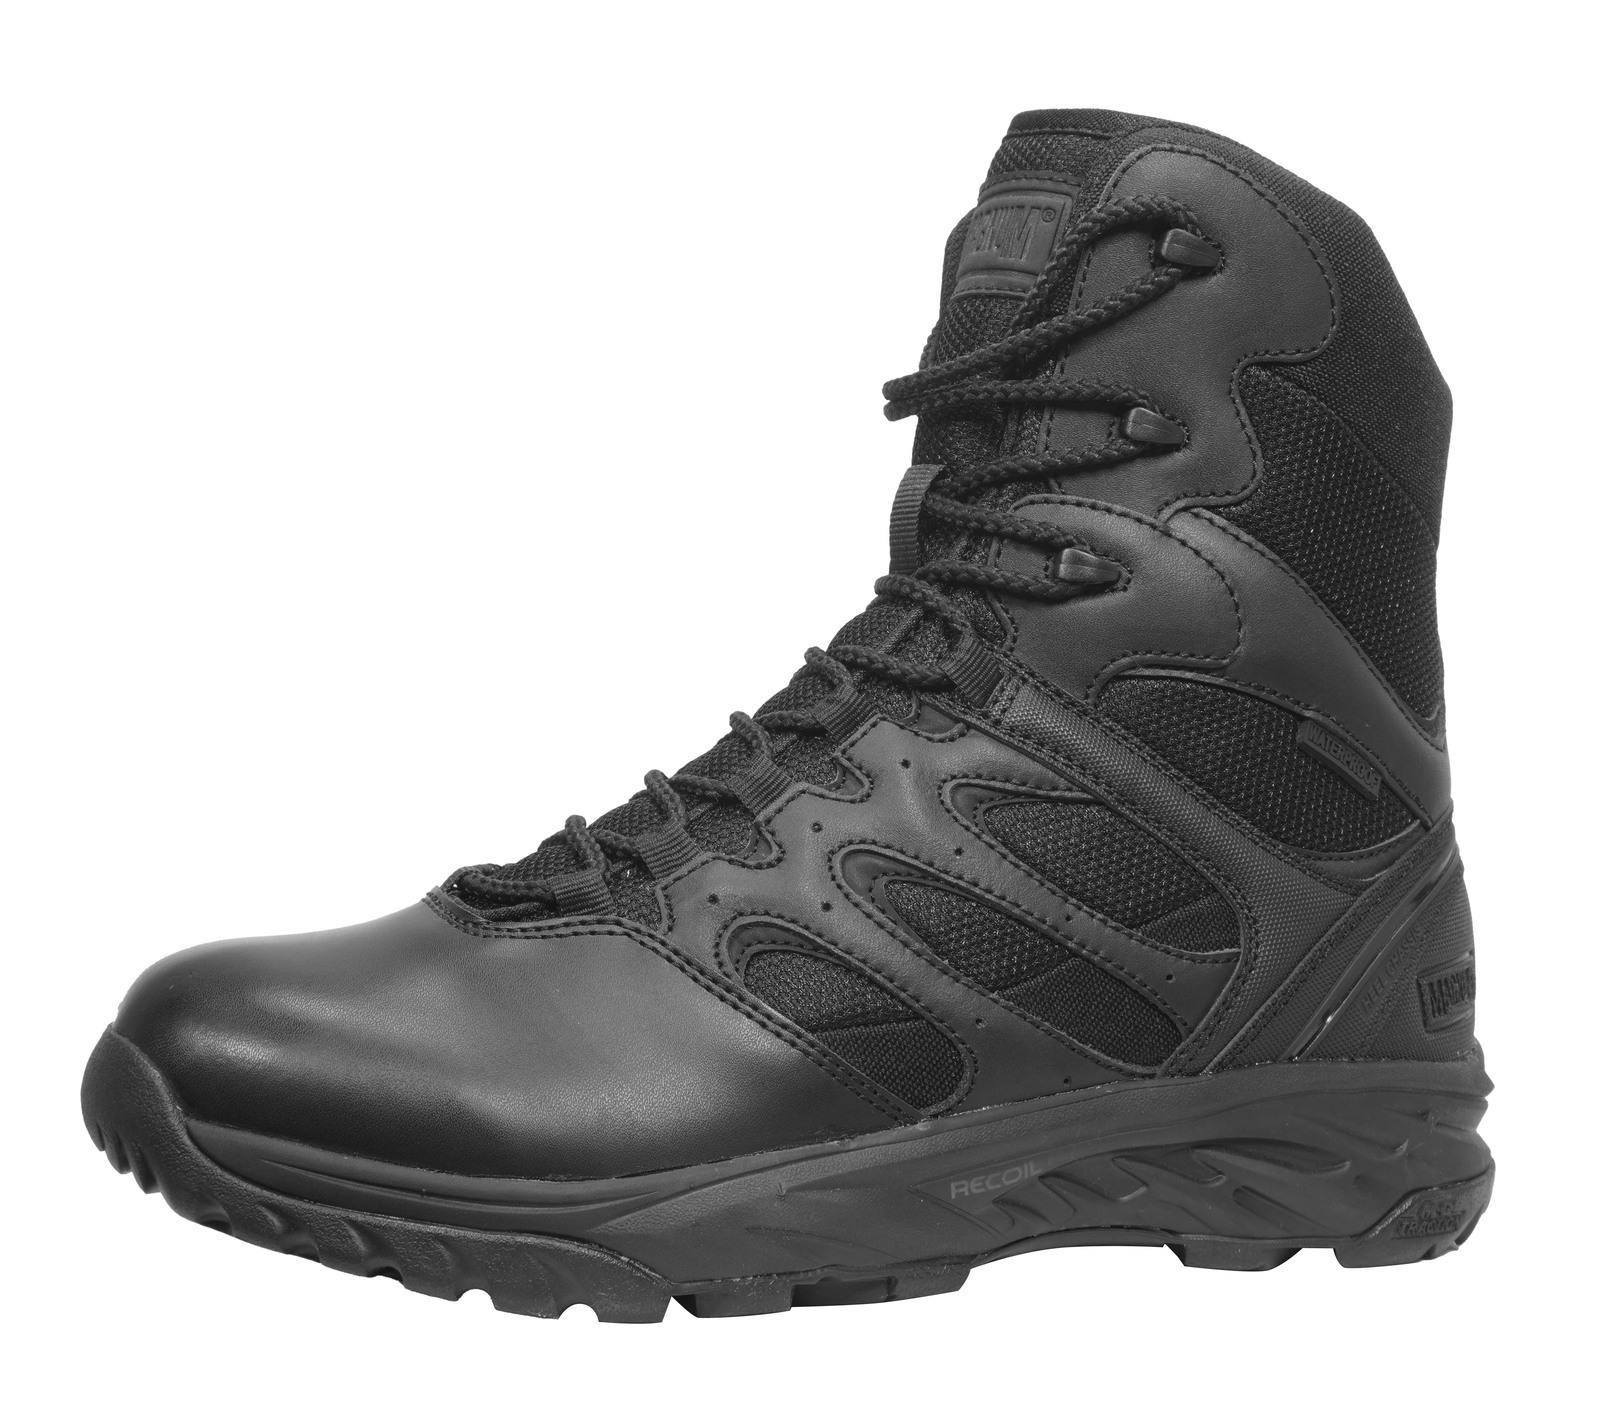 Magnum Boots Wild-Fire Tactical  inches - Side Zip - Waterproof I-Shield  - Black